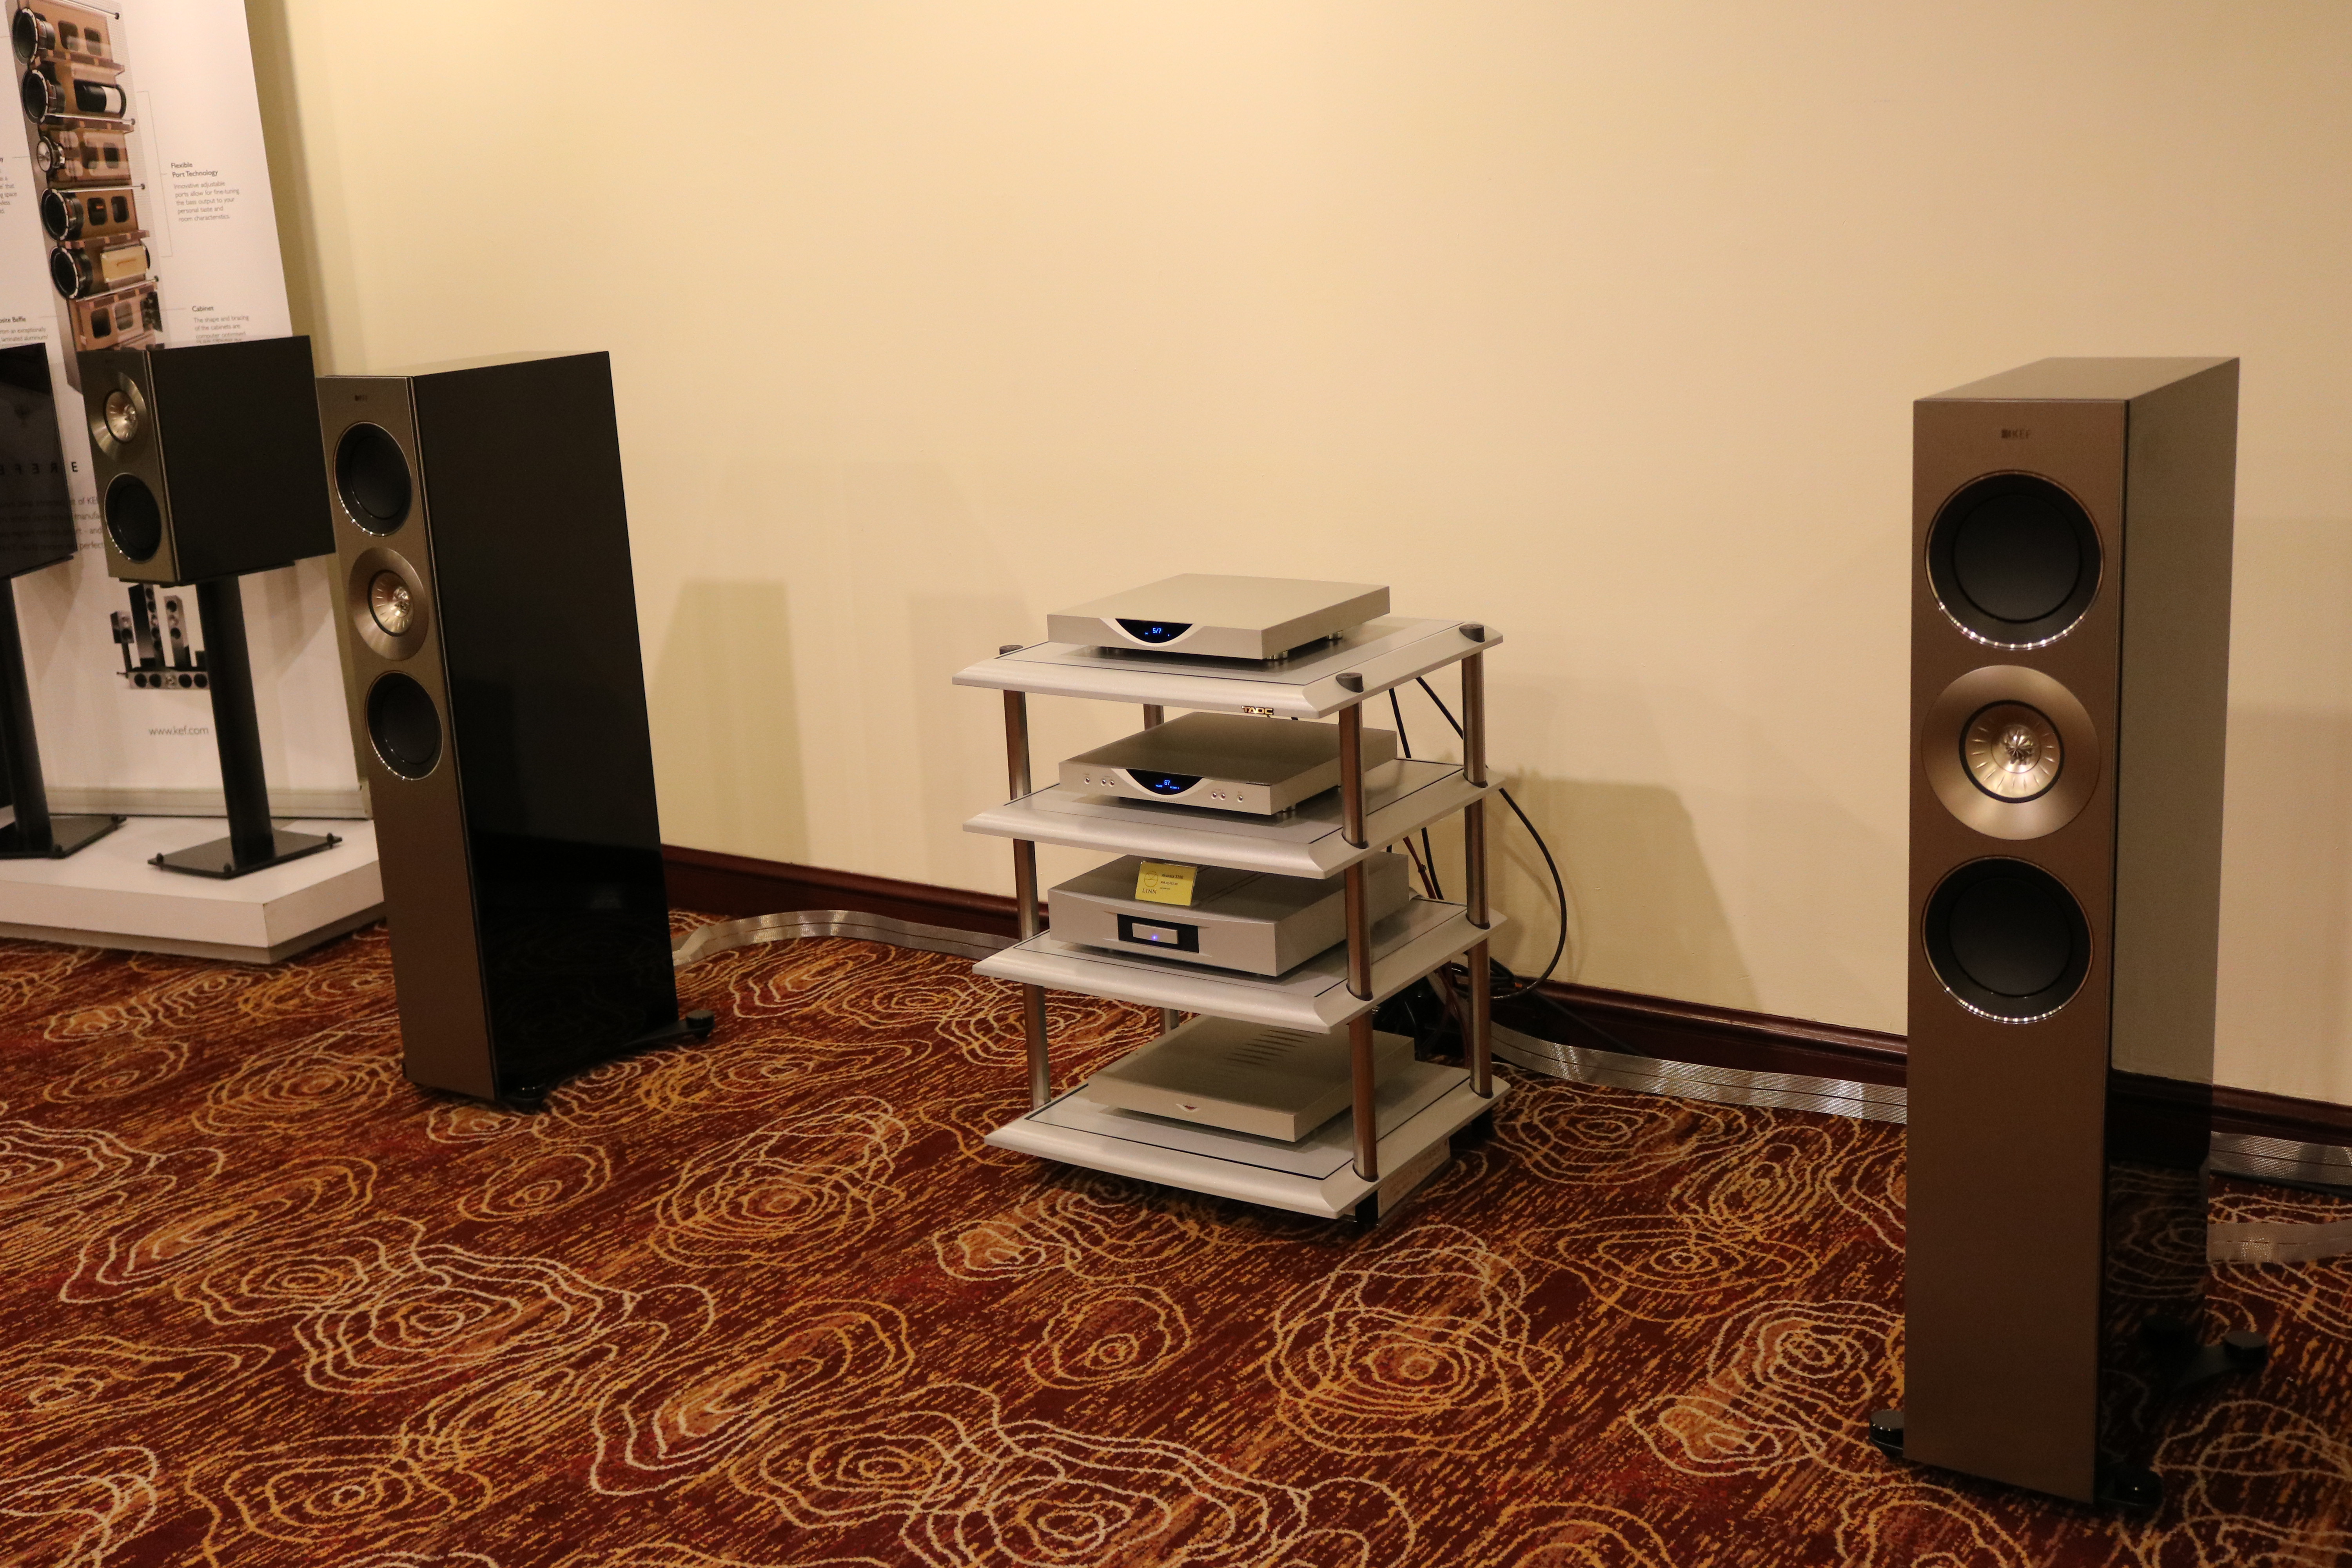 The KEF Reference series speakers were launched at the KLIAVS 2016.